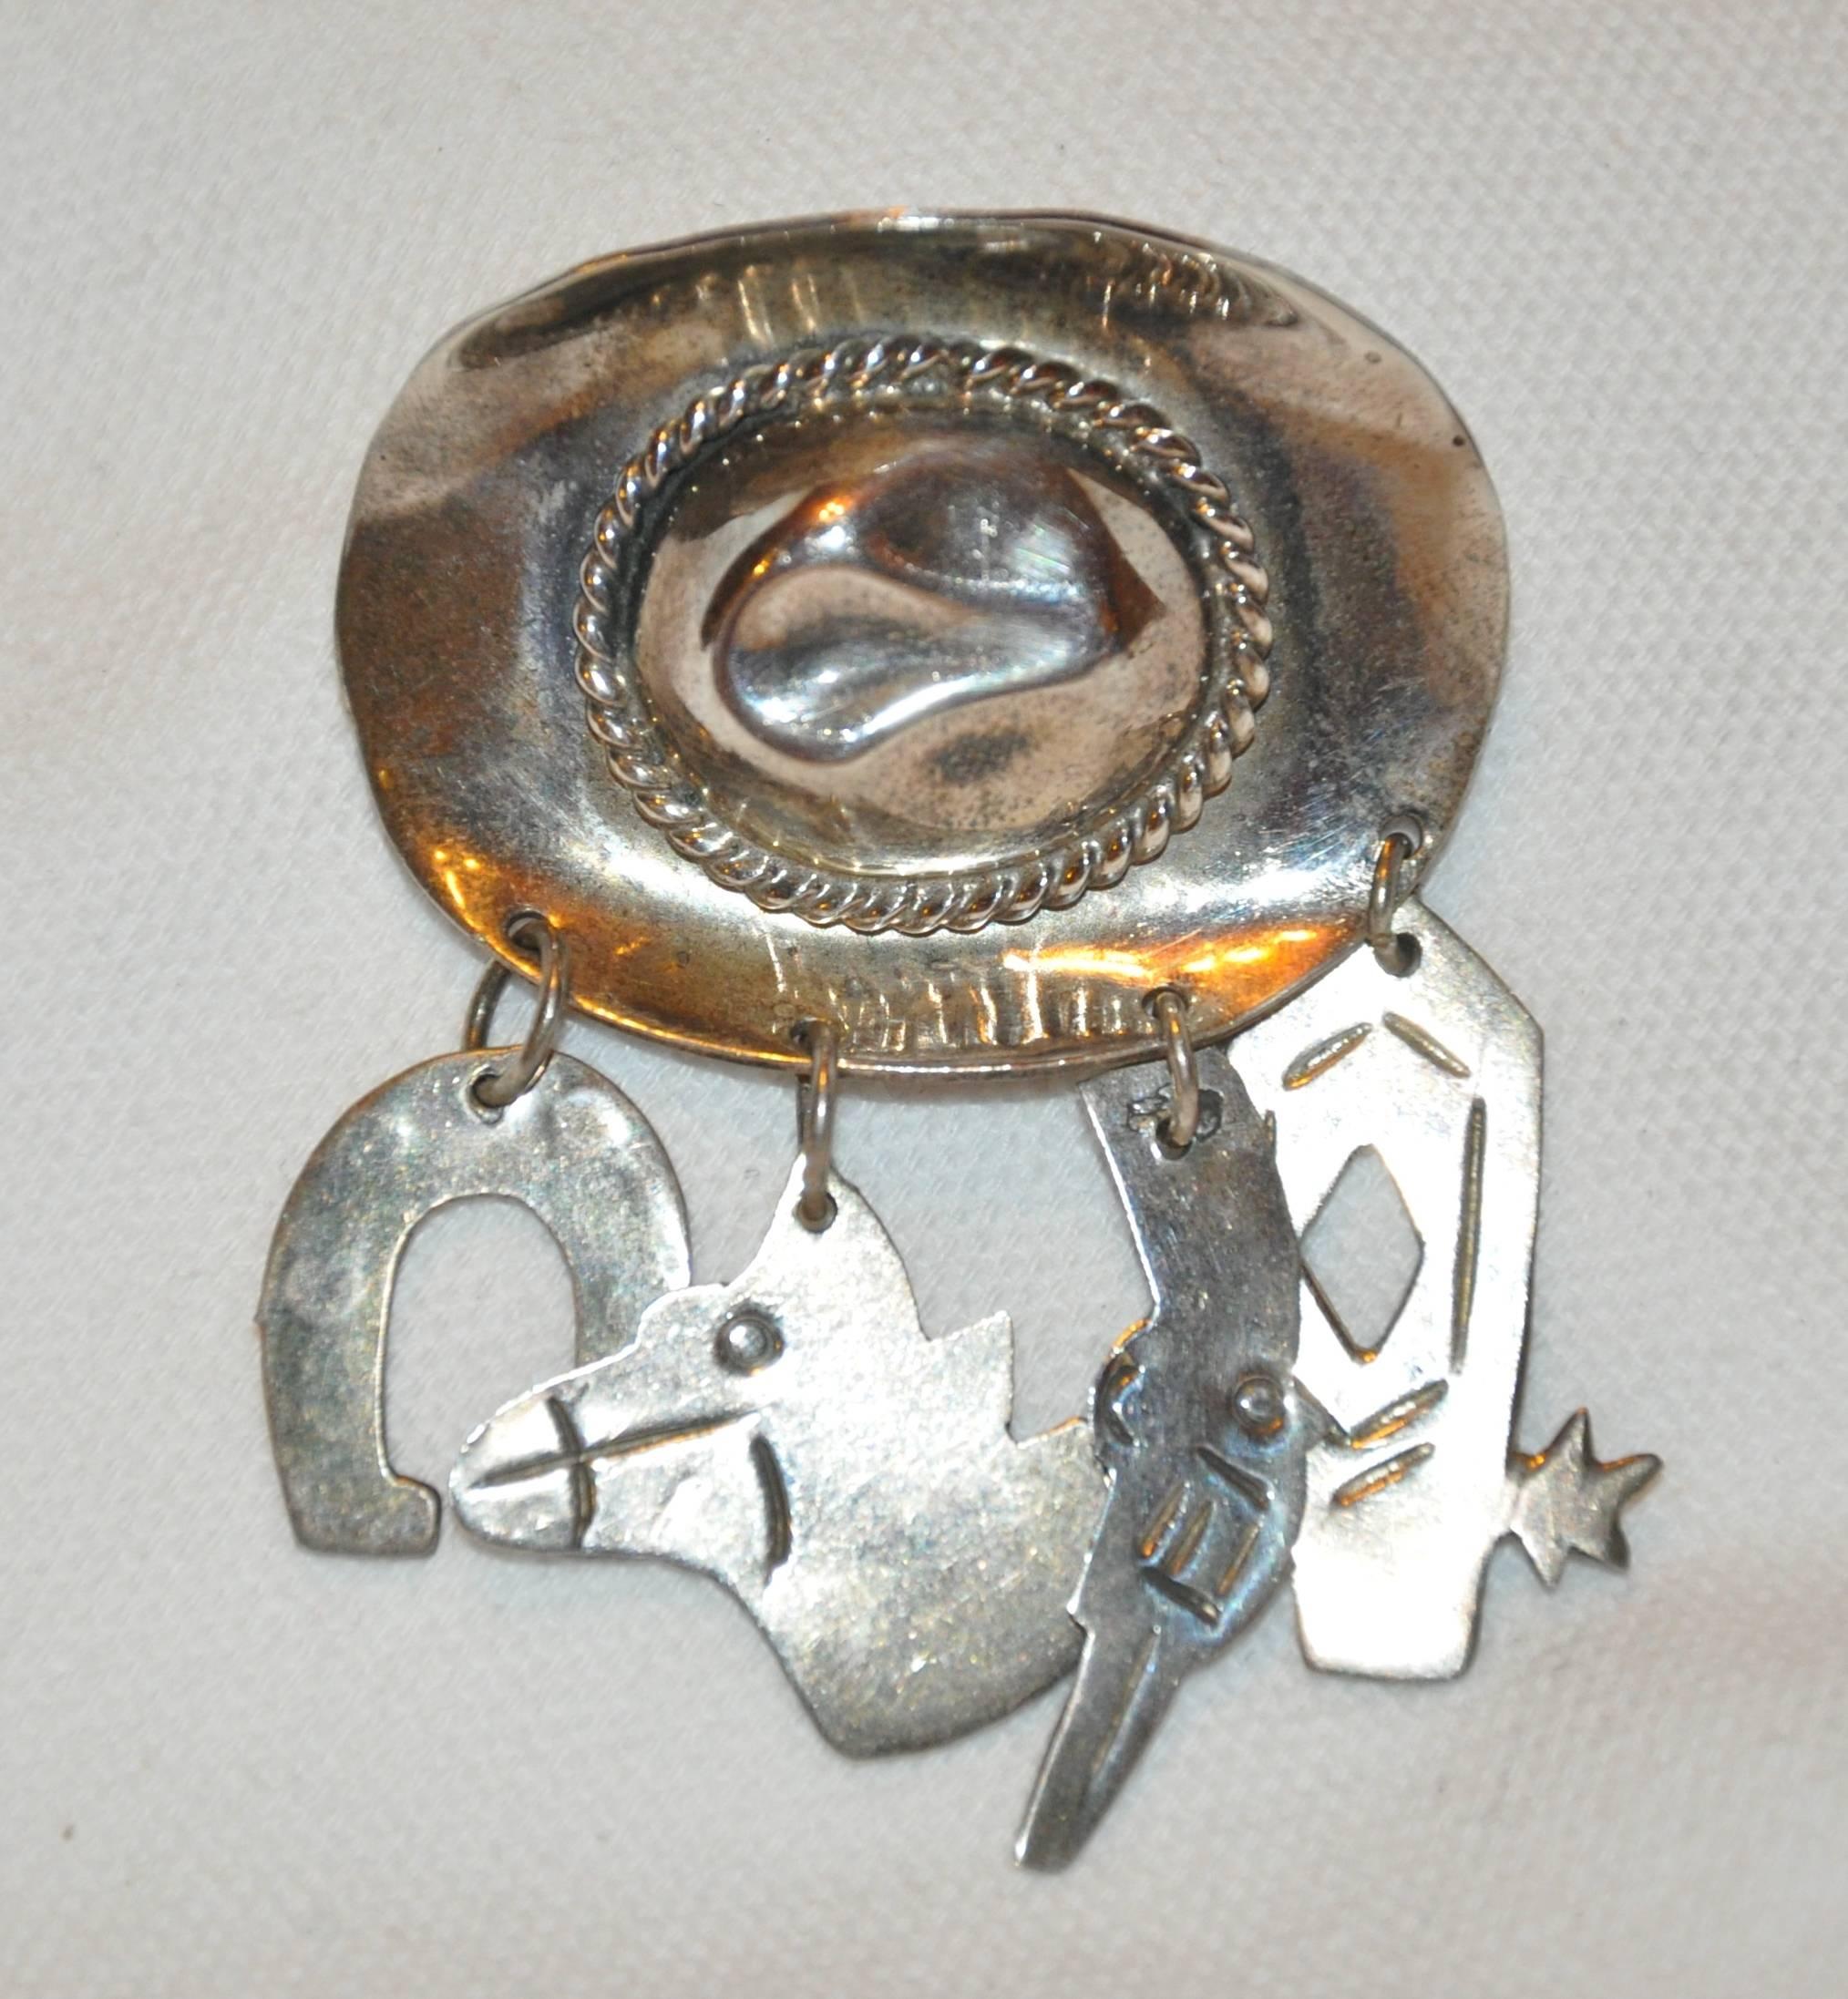       Wonderfully detailed, this "Cowboy Hat" brooch is accented with a cowboy's accessories such as a horse's shoe, gun, boots, and his companion displaying a horse's head dangling below the hat. The hat itself measures 1 7/16" x 1